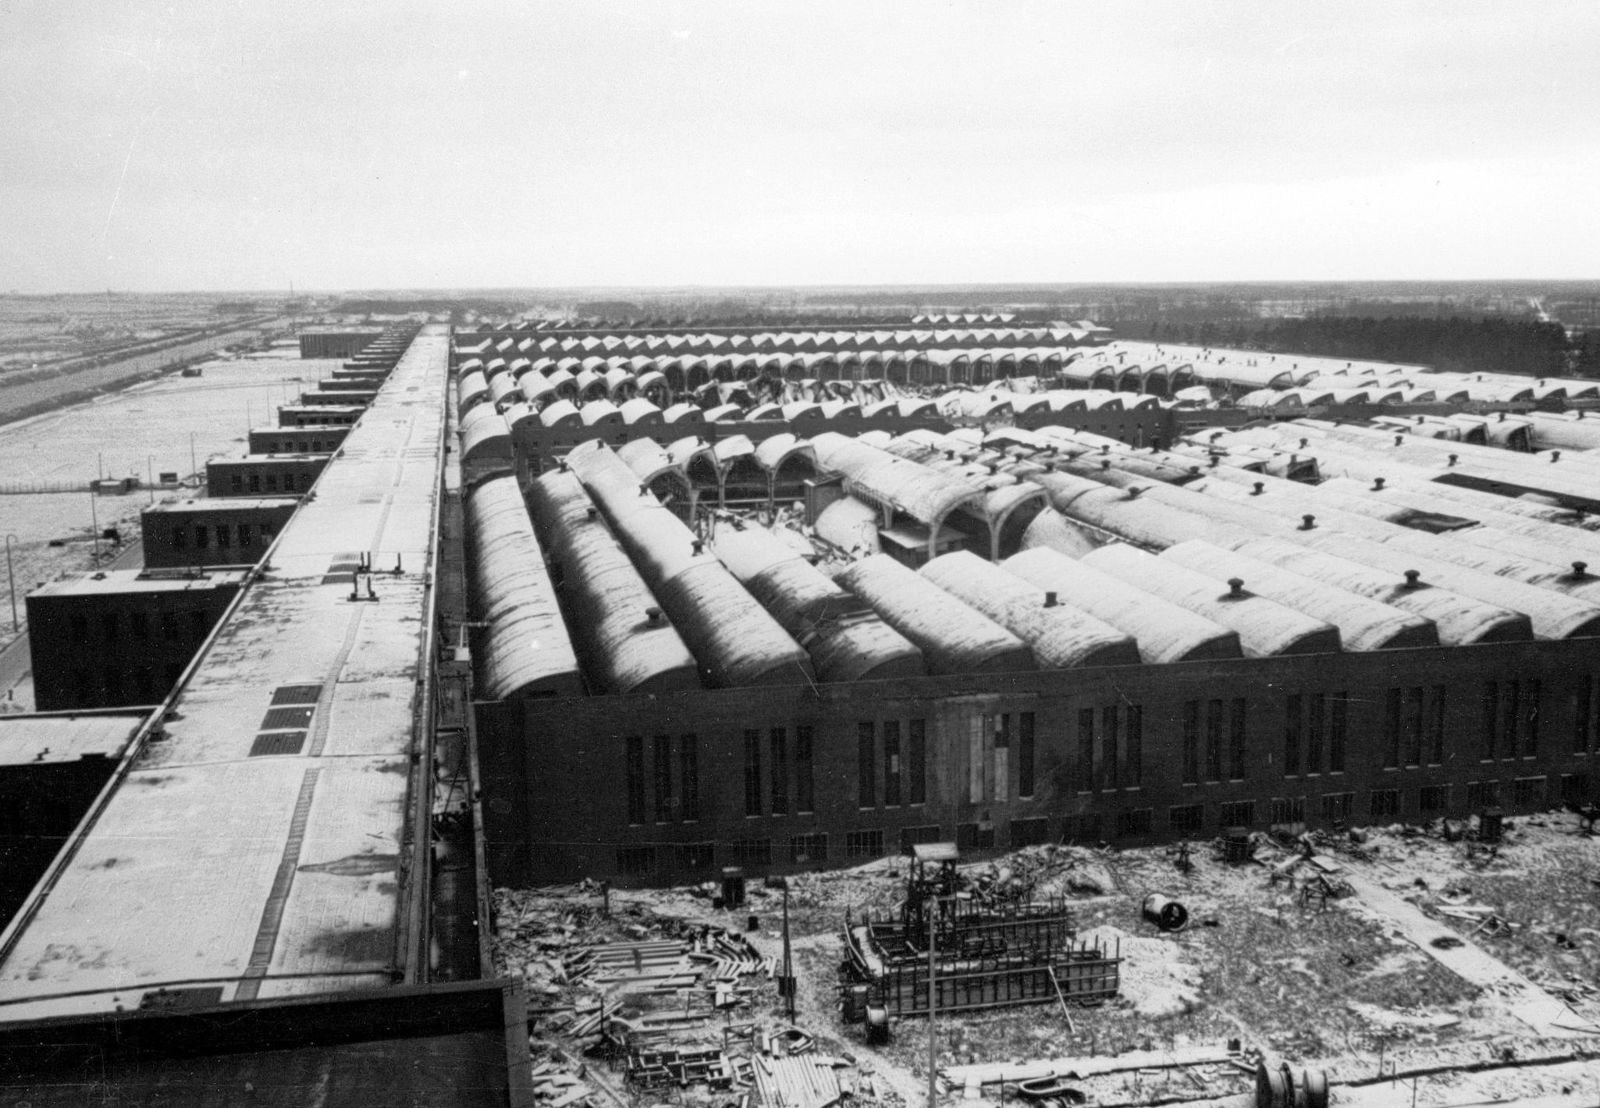 The Volkswagen plant had been largely destroyed by air raids in 1944.